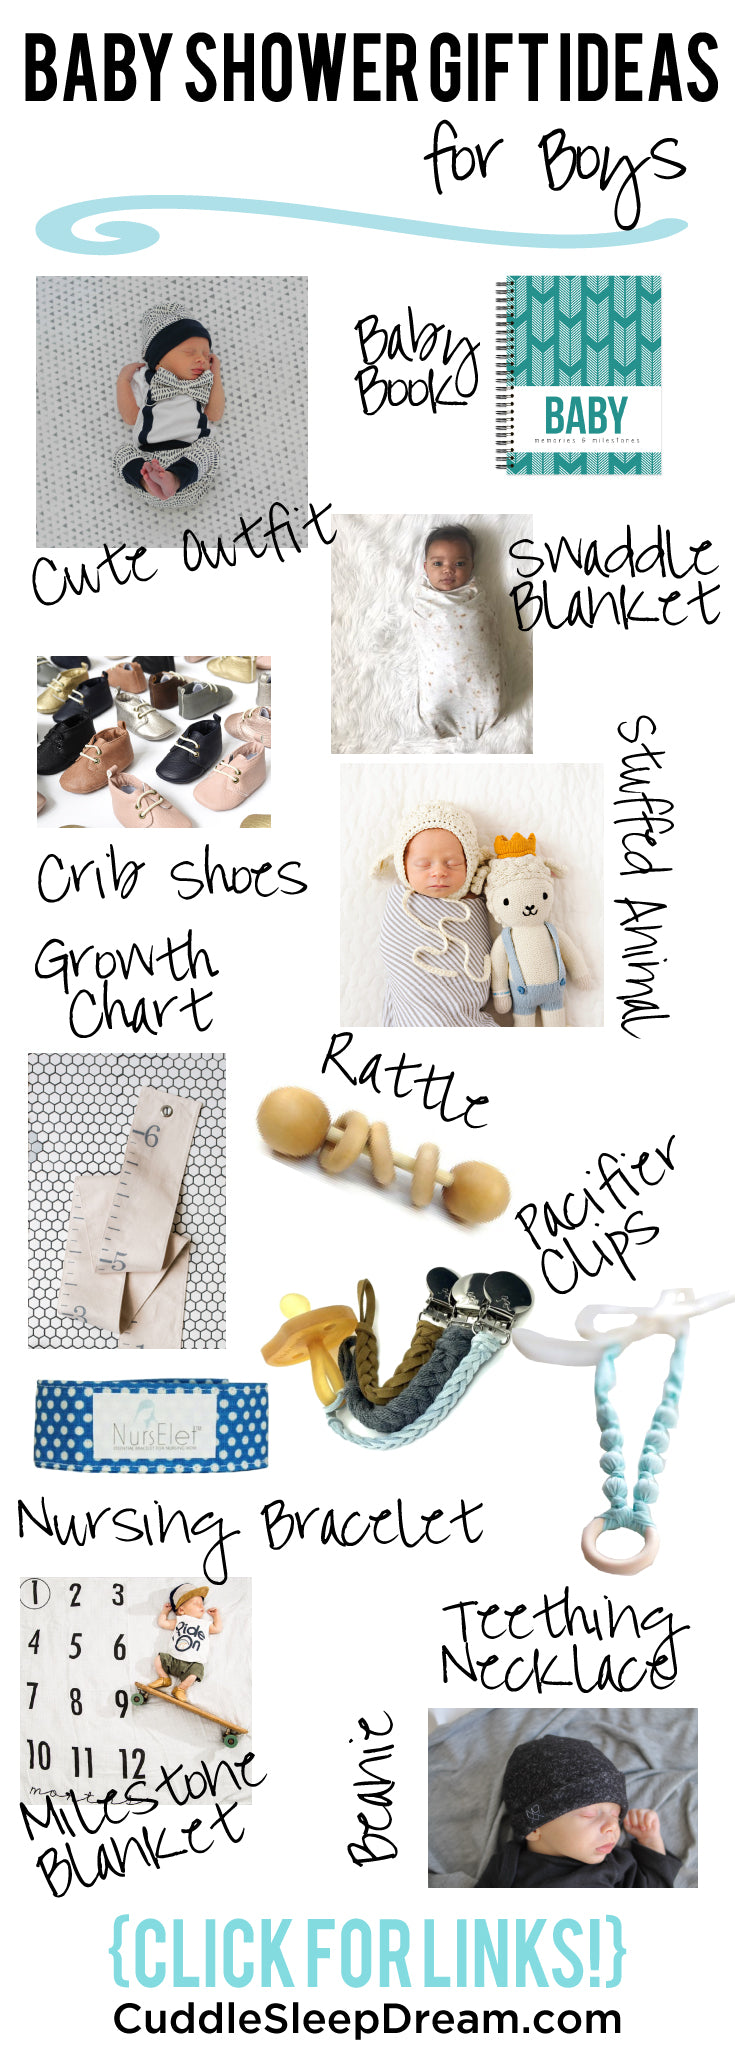 baby shower ideas for boys: shop small and handmade!